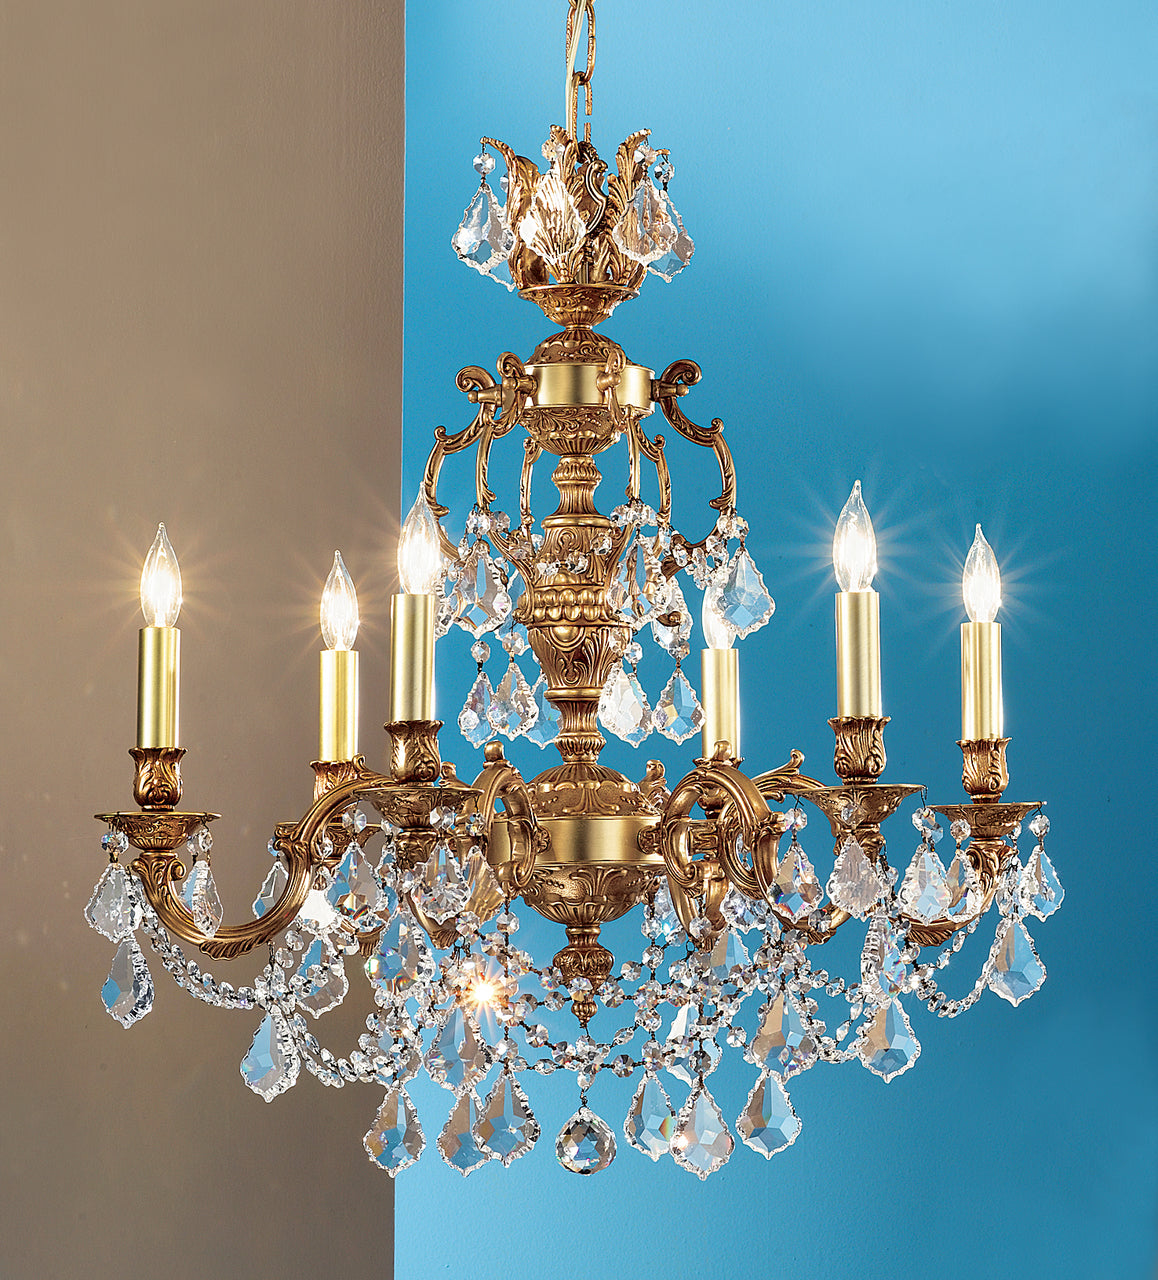 Classic Lighting 57386 AGB CBK Chateau Imperial Crystal Chandelier in Aged Bronze (Imported from Spain)